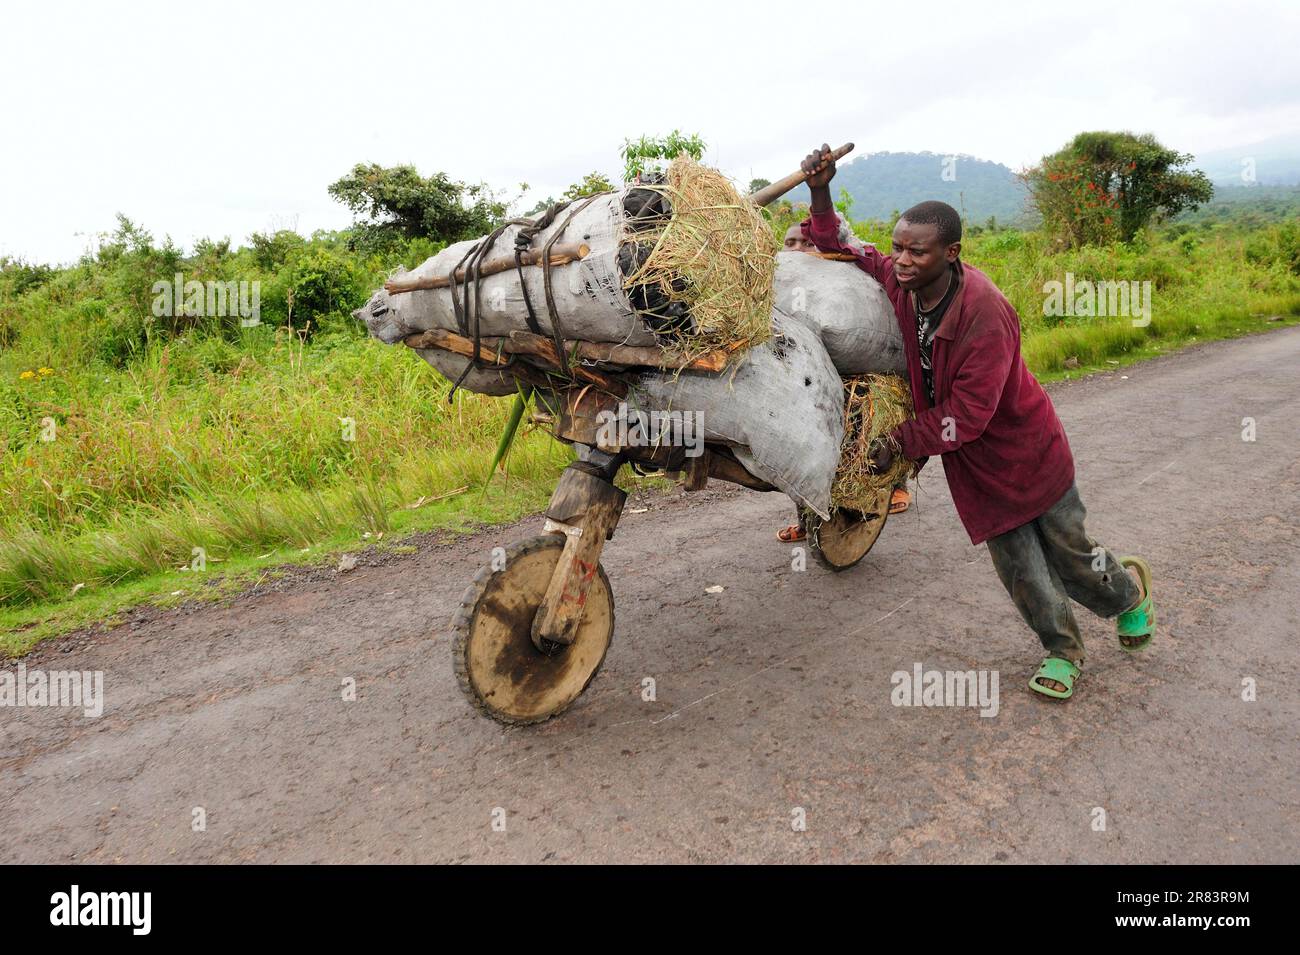 Men pushing chukudu loaded with bags of charcoal, road from Sake to Goma, North Kivu, Democratic Republic of Congo Stock Photo